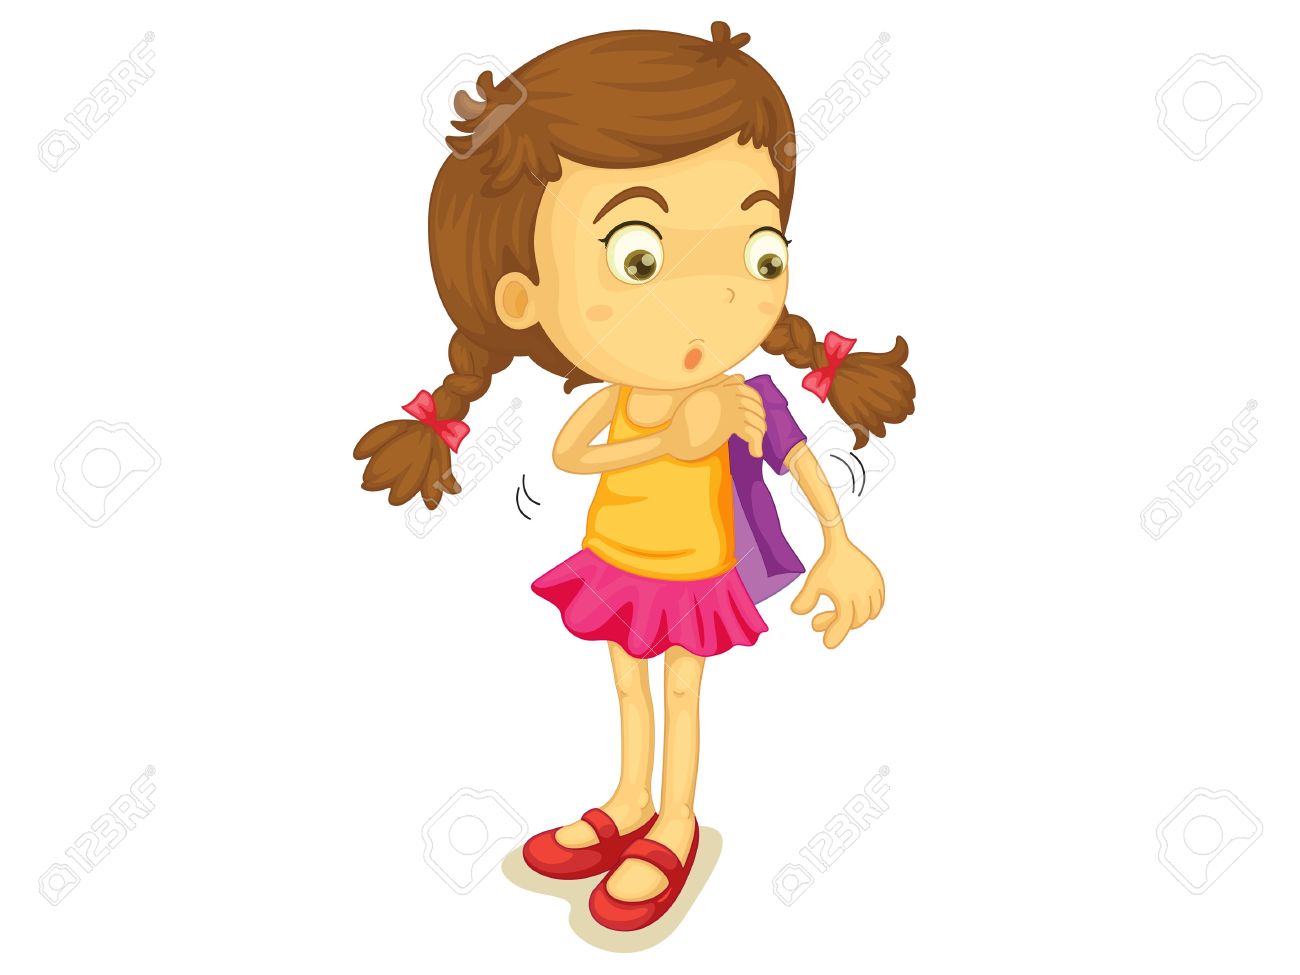 Girl Getting Dressed Clipart